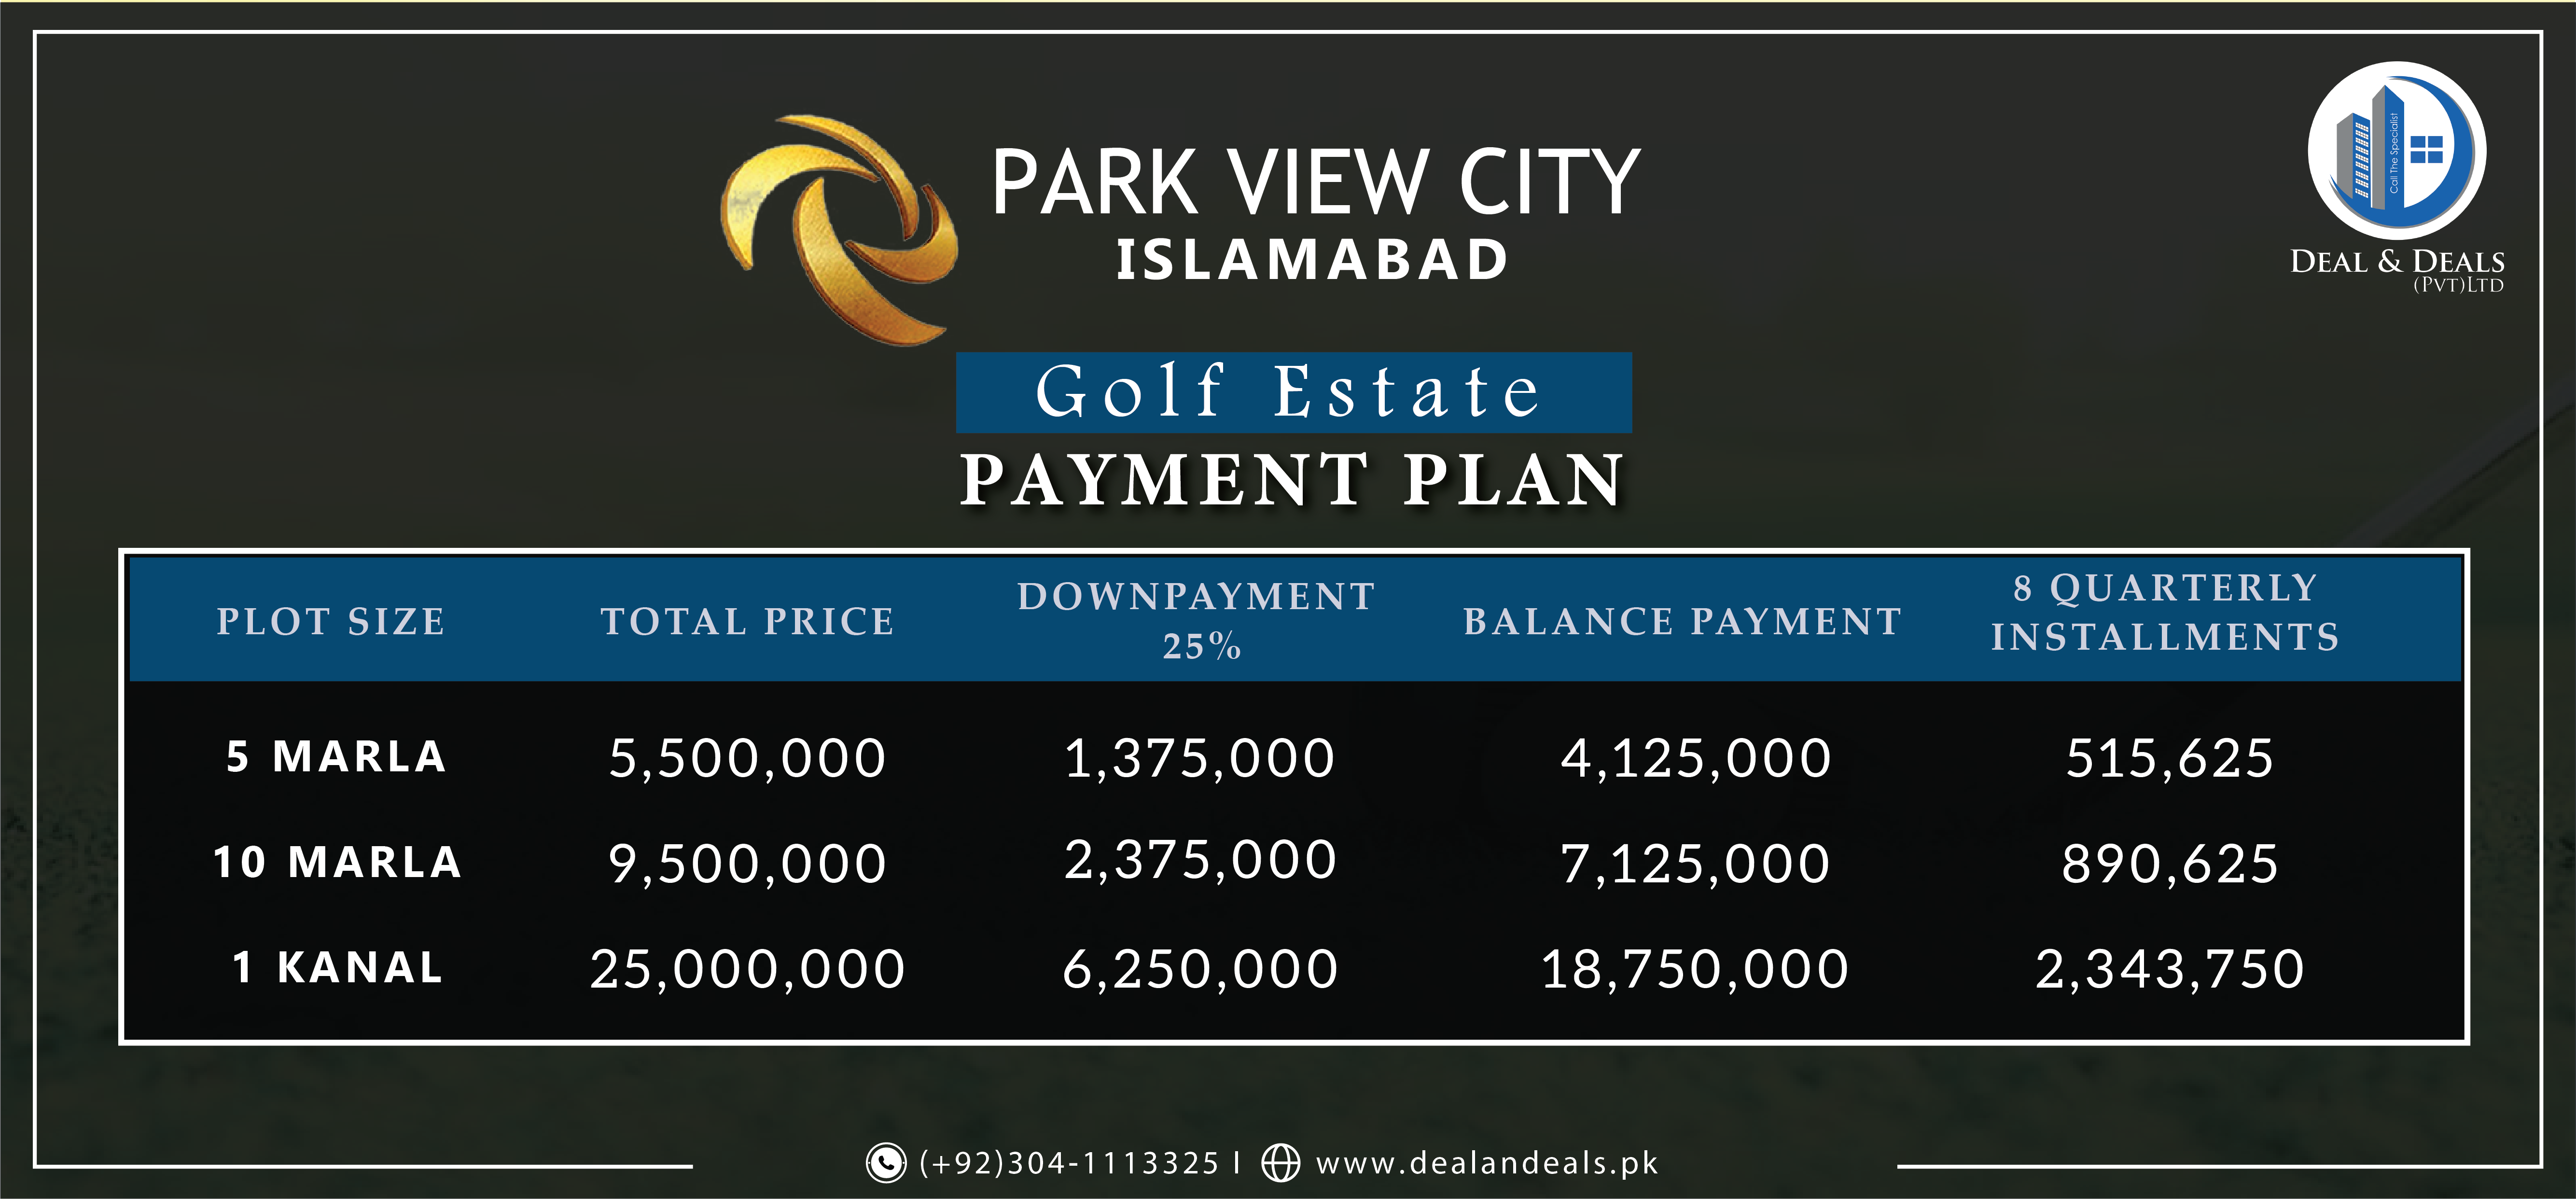 Park View City Islamabad | Payment Plan | Location & Map